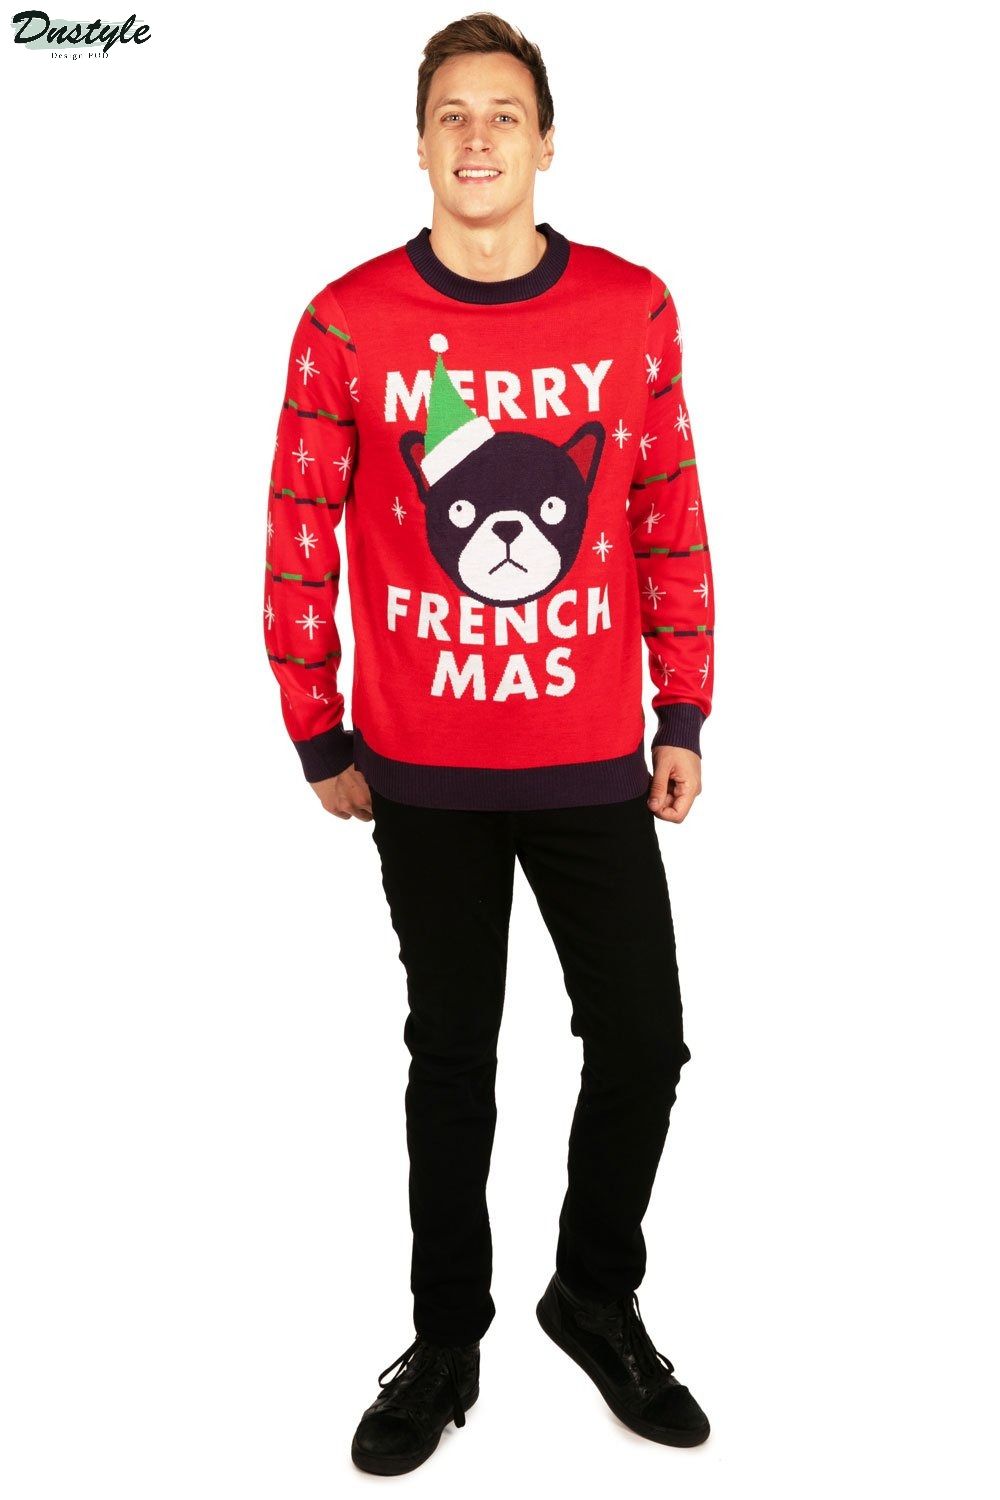 Merry Frenchmas Ugly Christmas Sweater 1